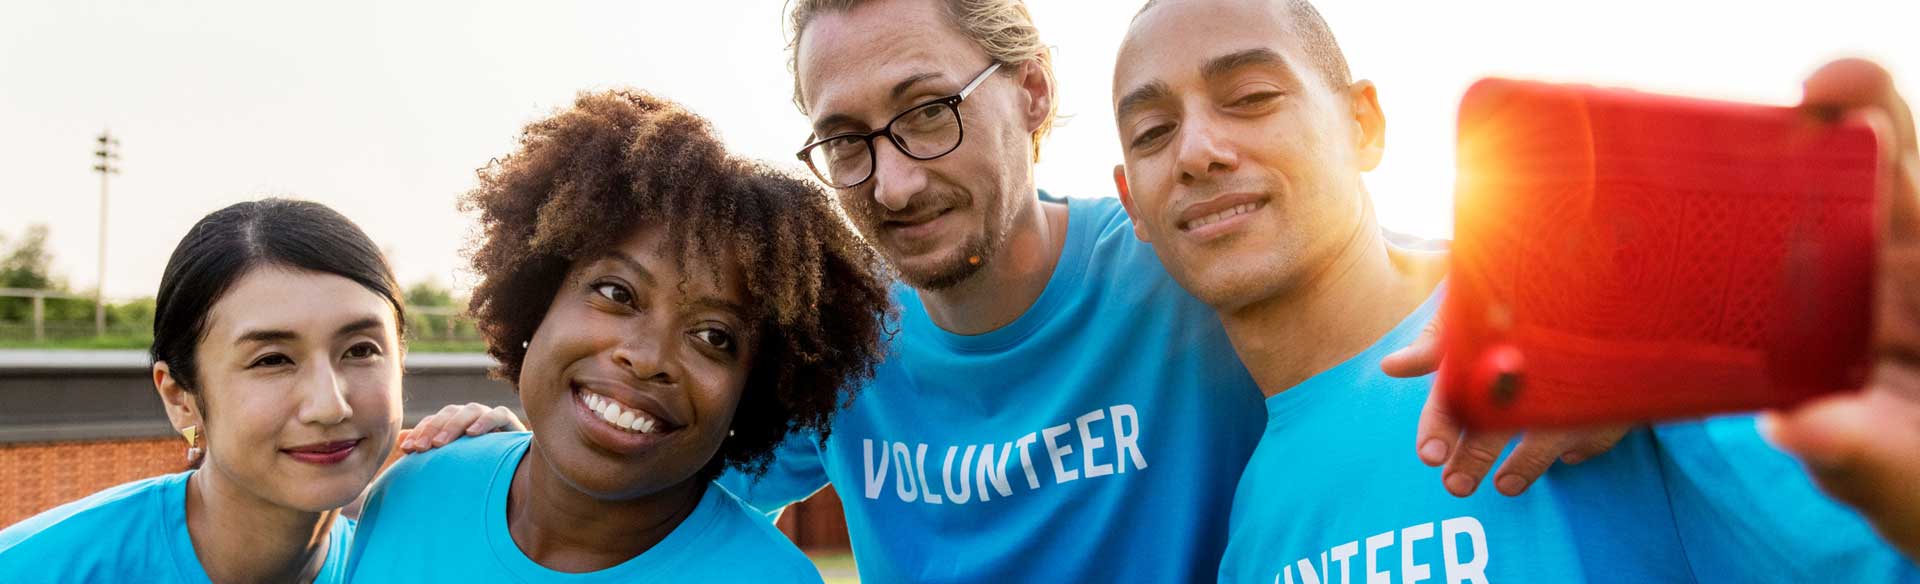 Spotlight what your company volunteers are doing in the community